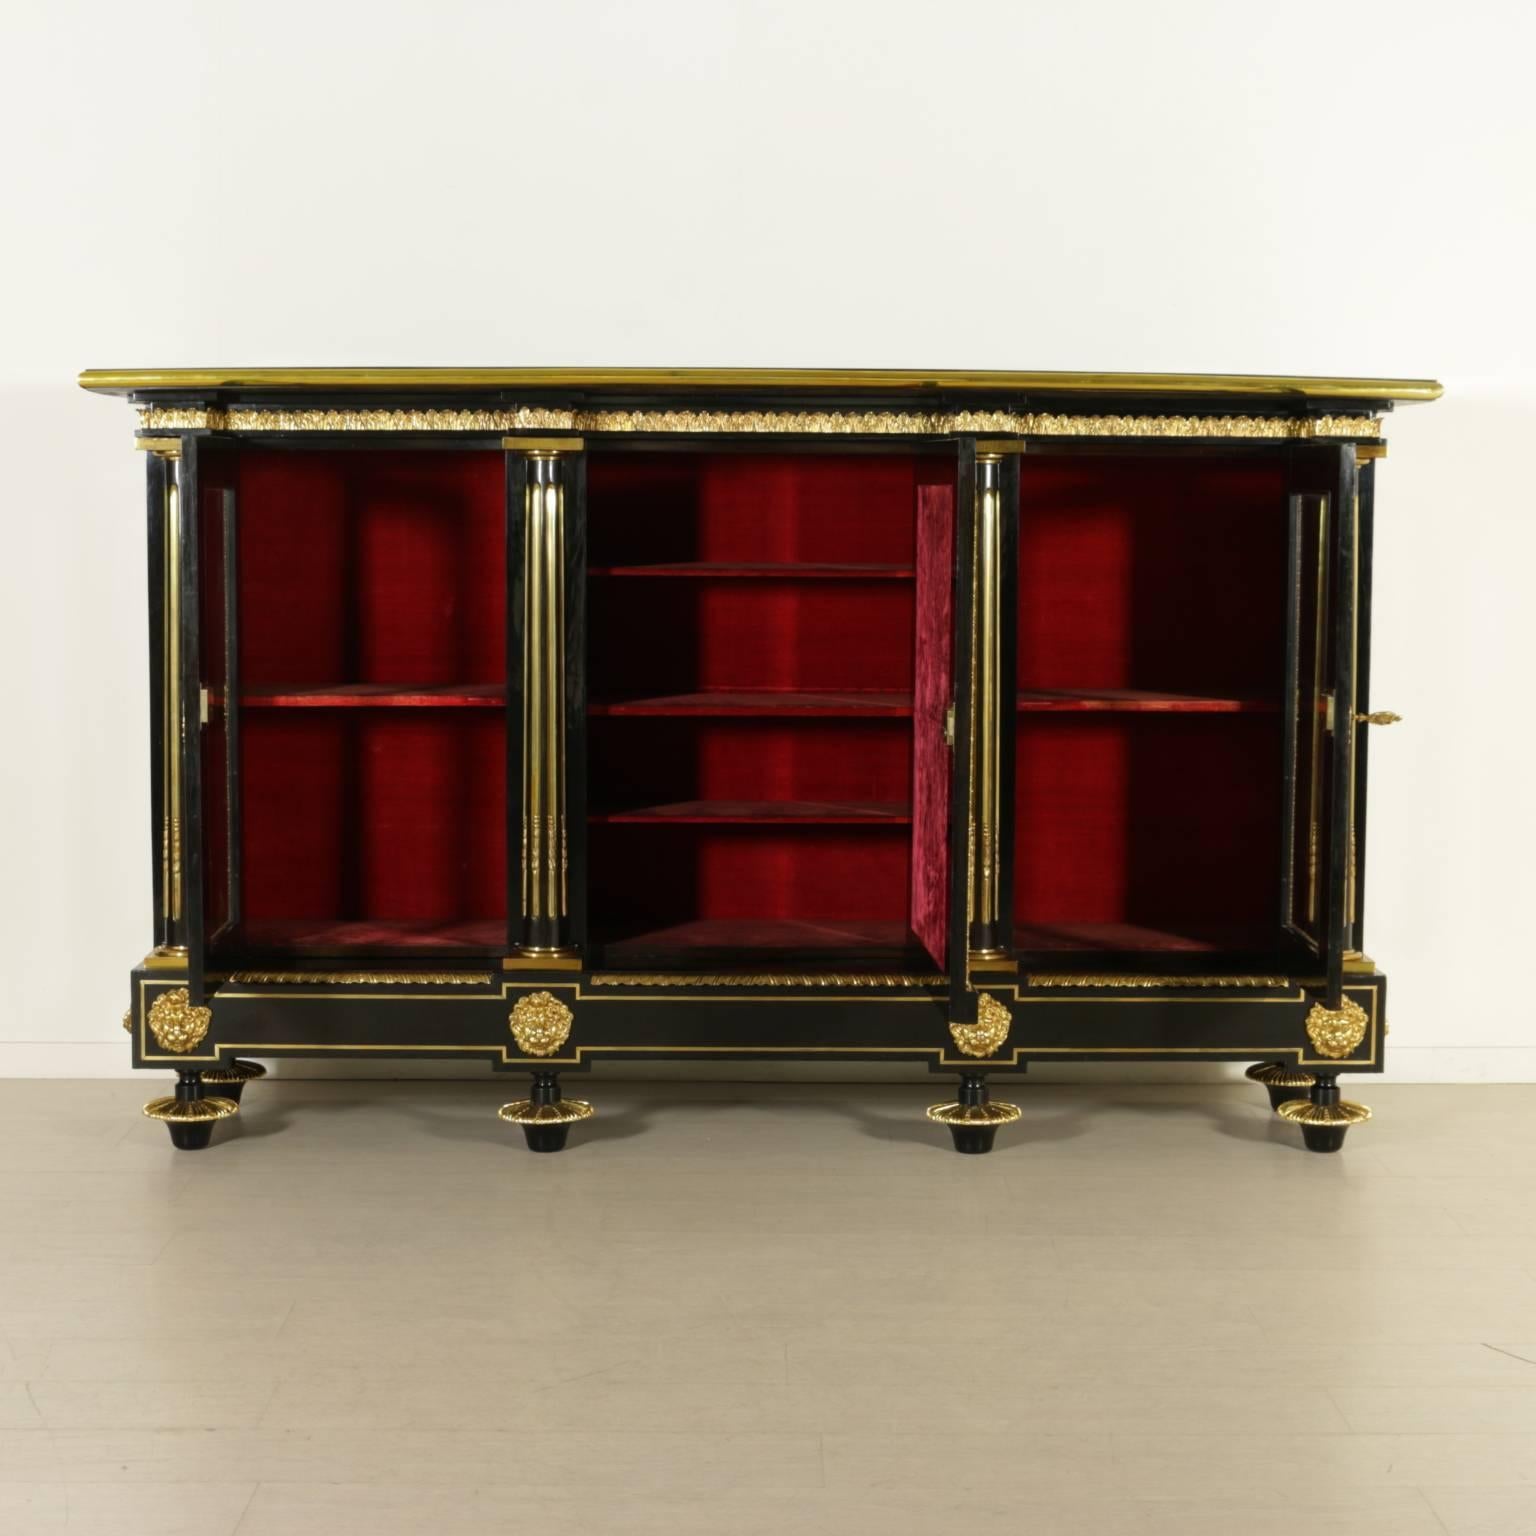 Impressive 19th century Louis XIV sideboard made up of two side doors with glasses and a central door with inlaid panel. The whole cabinet is ebony veneered with turtle inserts engraved with pewter and brass. The central door, the richest panel, is